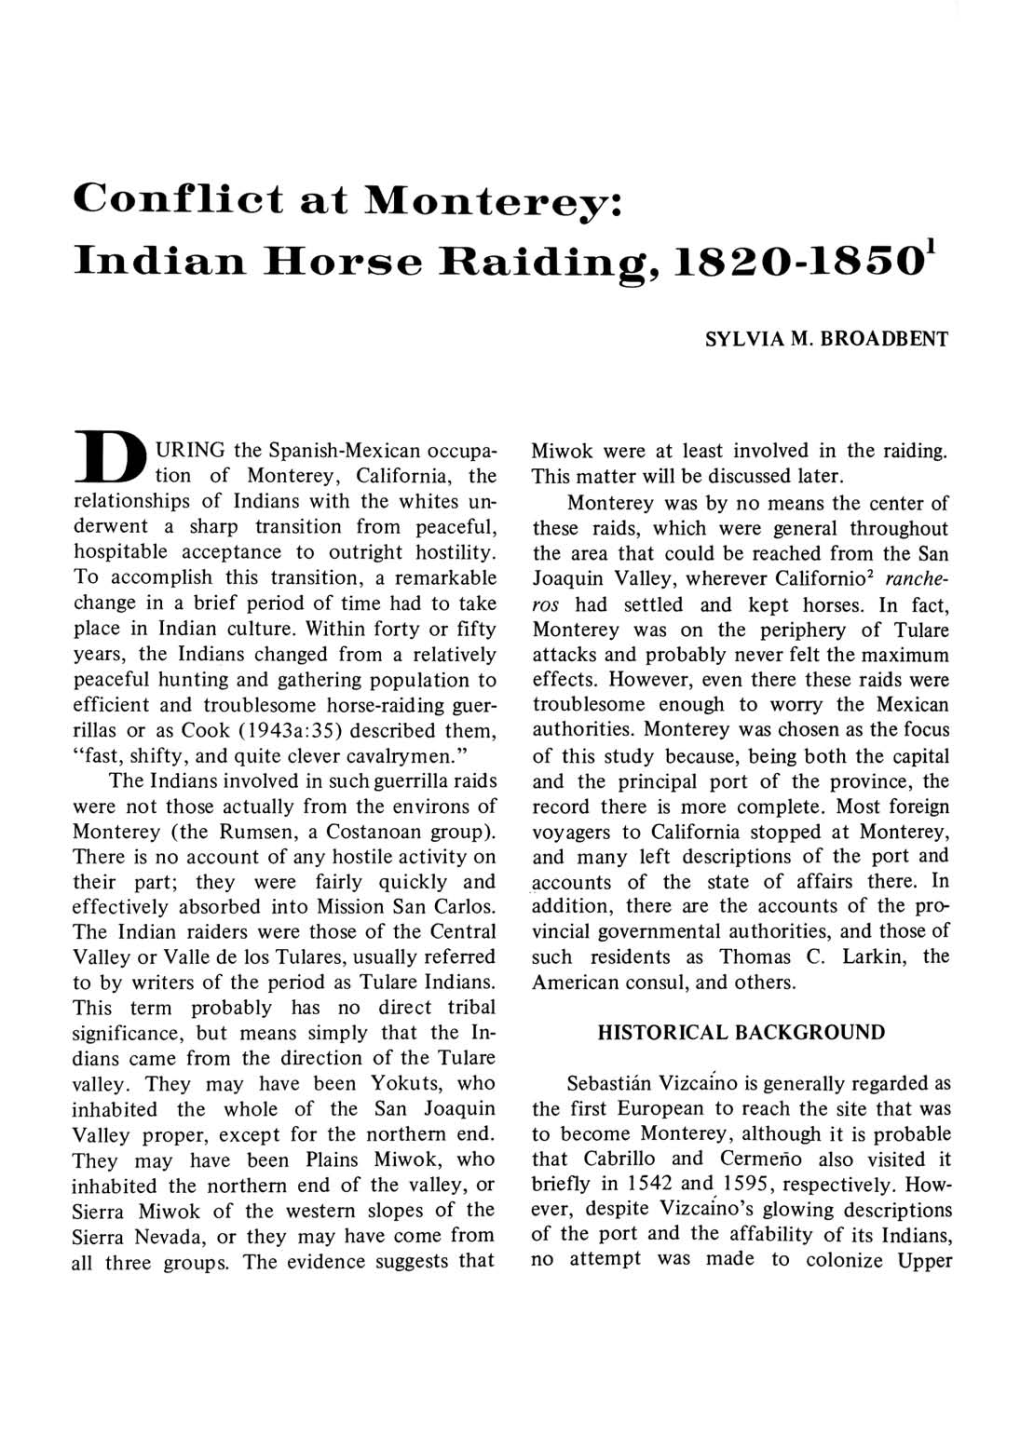 Conflict at Monterey: Indian Horse Raiding, 1820-1850'